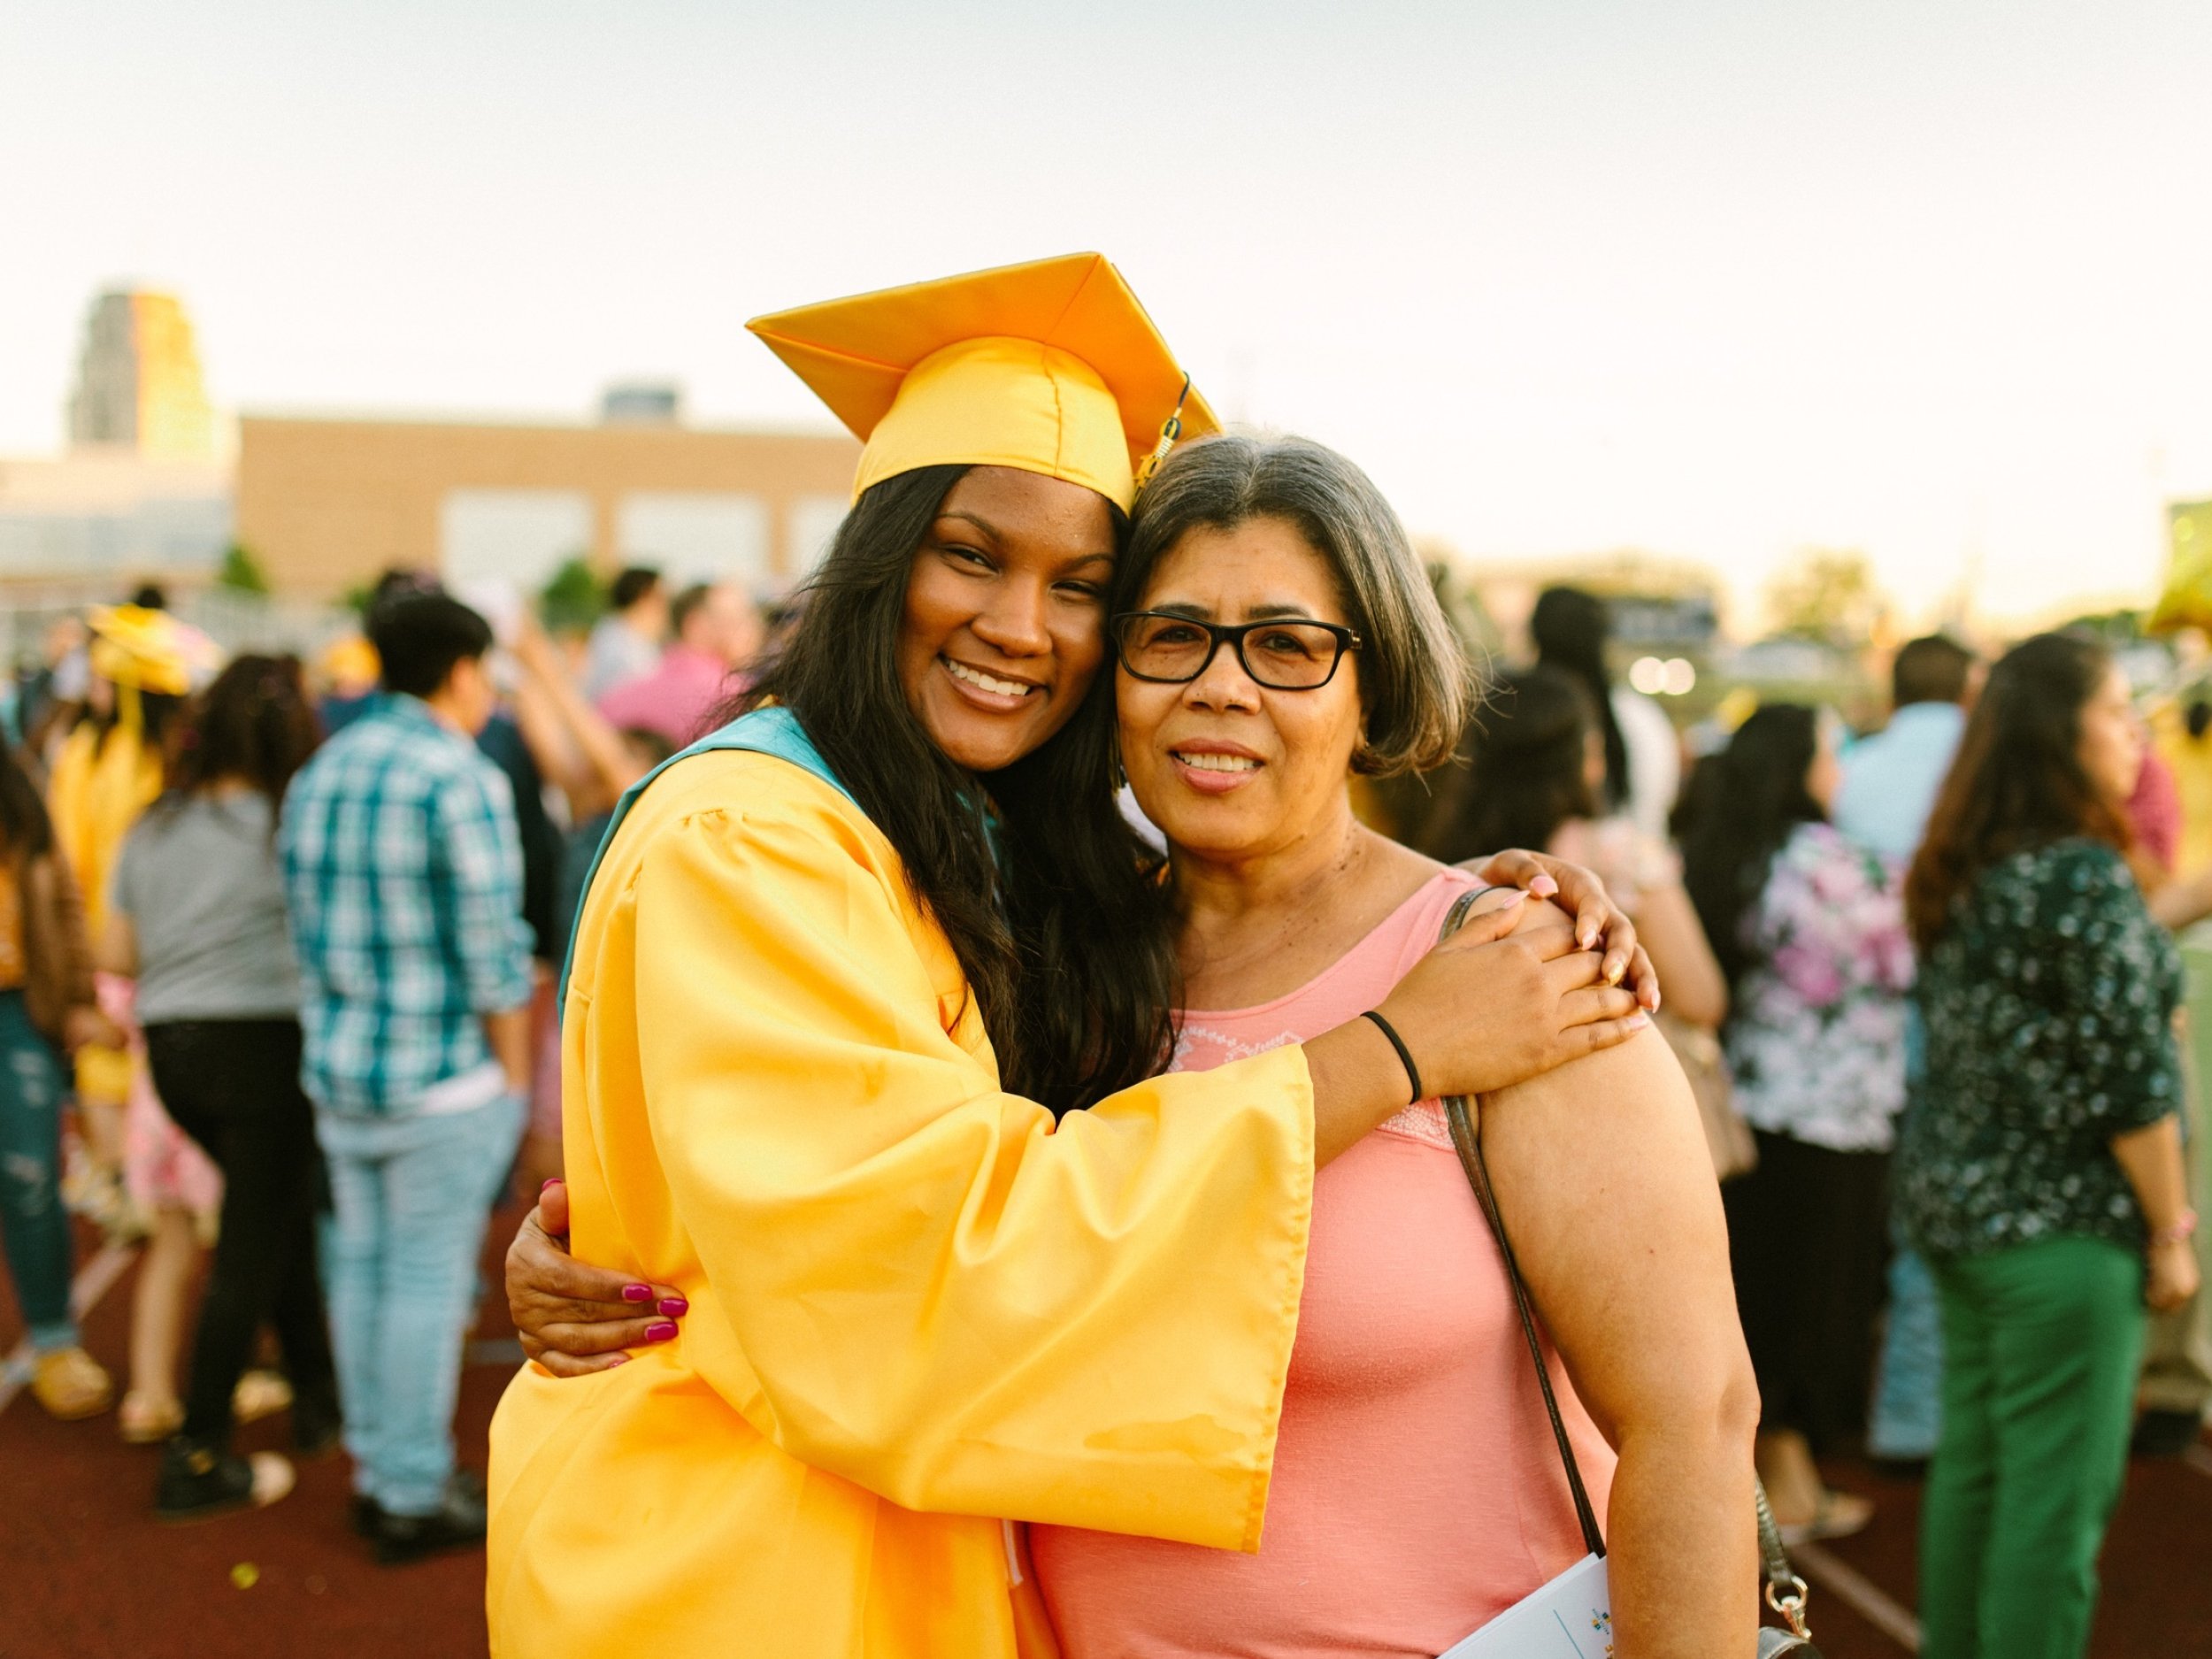 A graduating senior in cap and gown hugs a parent at the ceremony